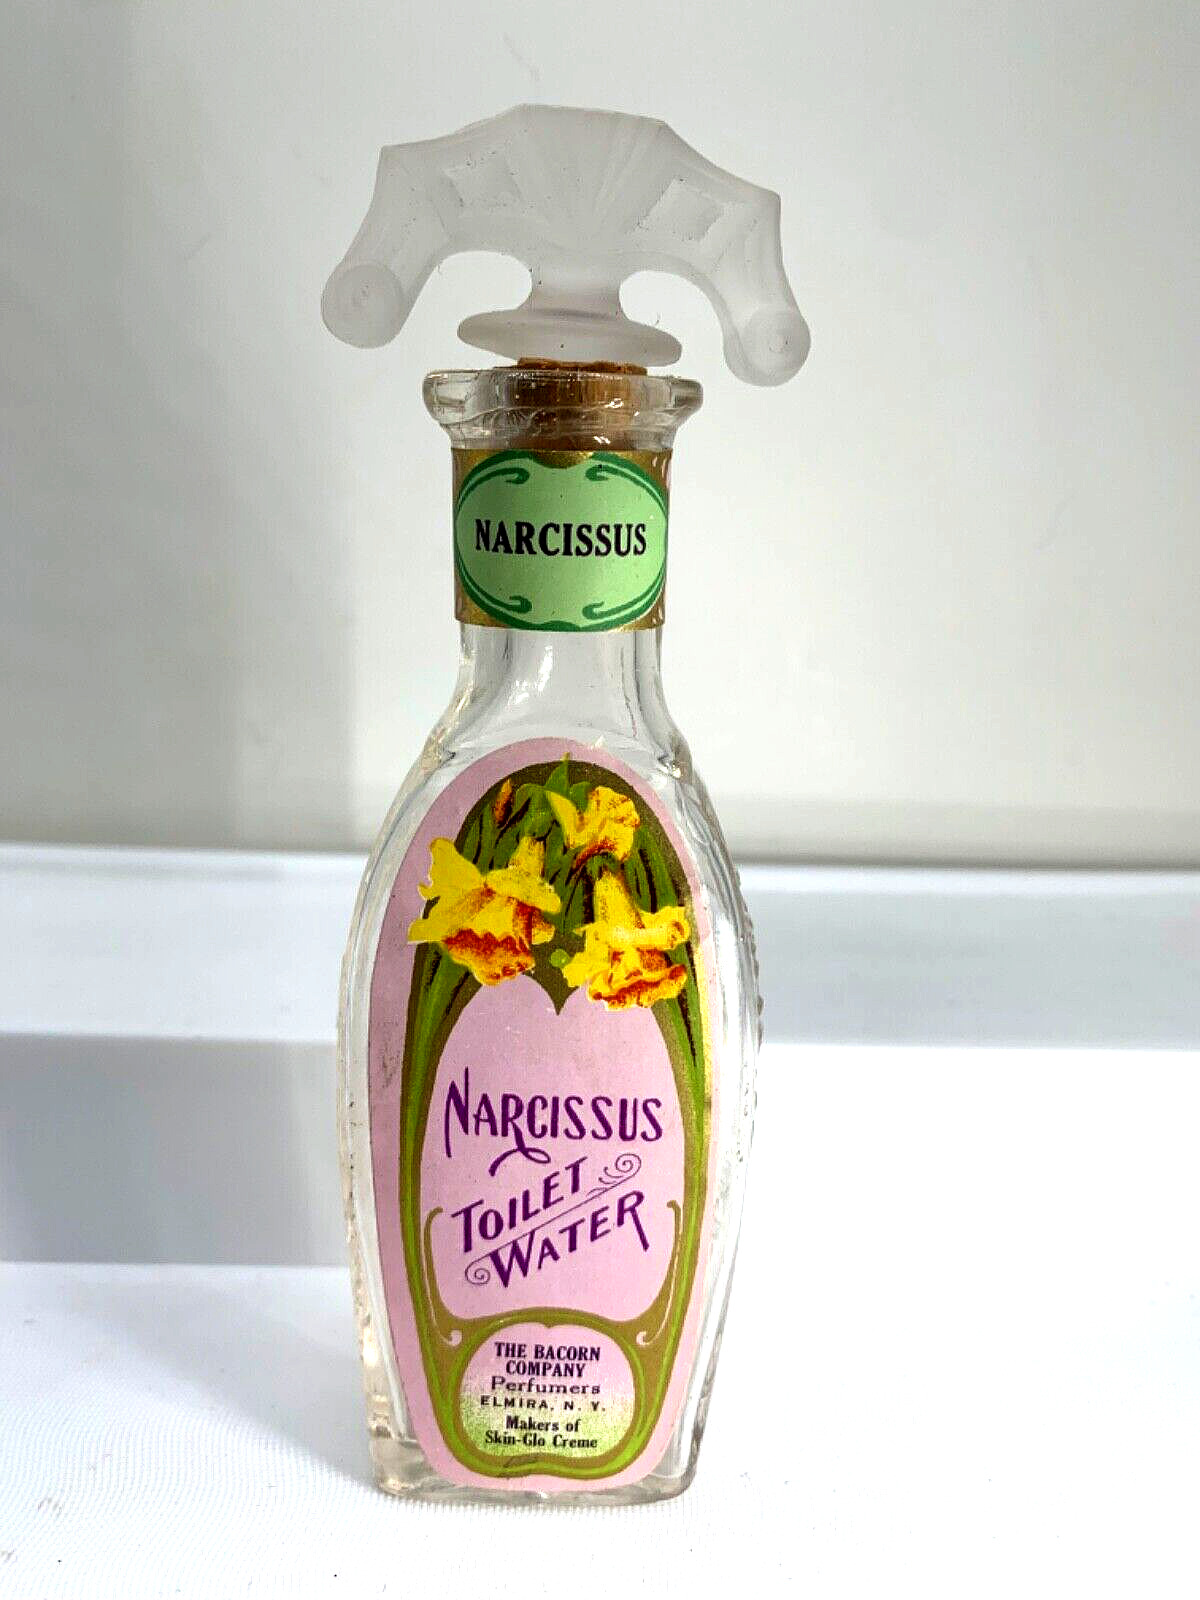 Brilliant  Antique perfume bottle.  Narcissus by The Bacorn Company.  1920s.